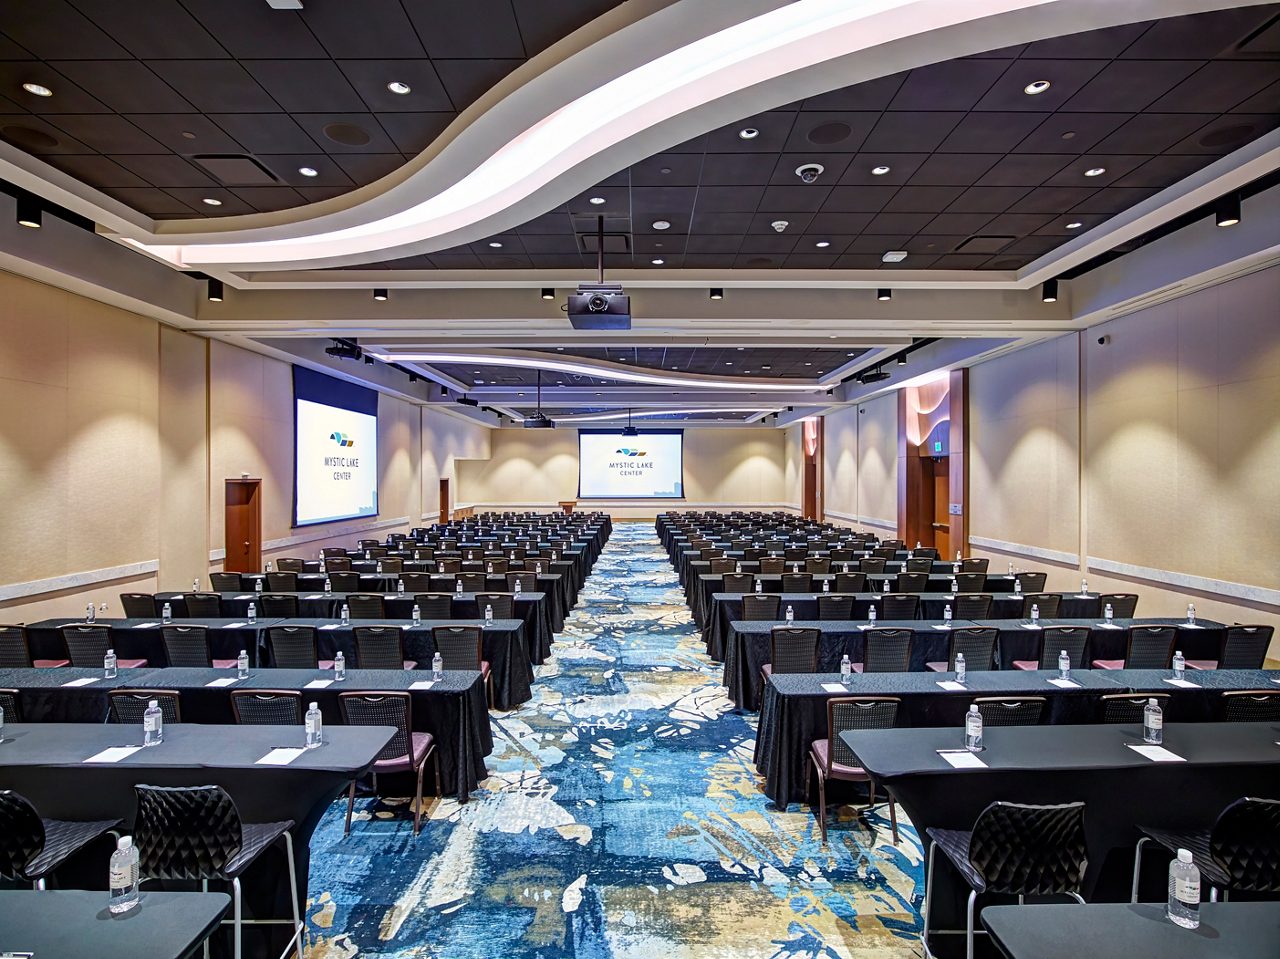 Meeting & Event Space Capabilities